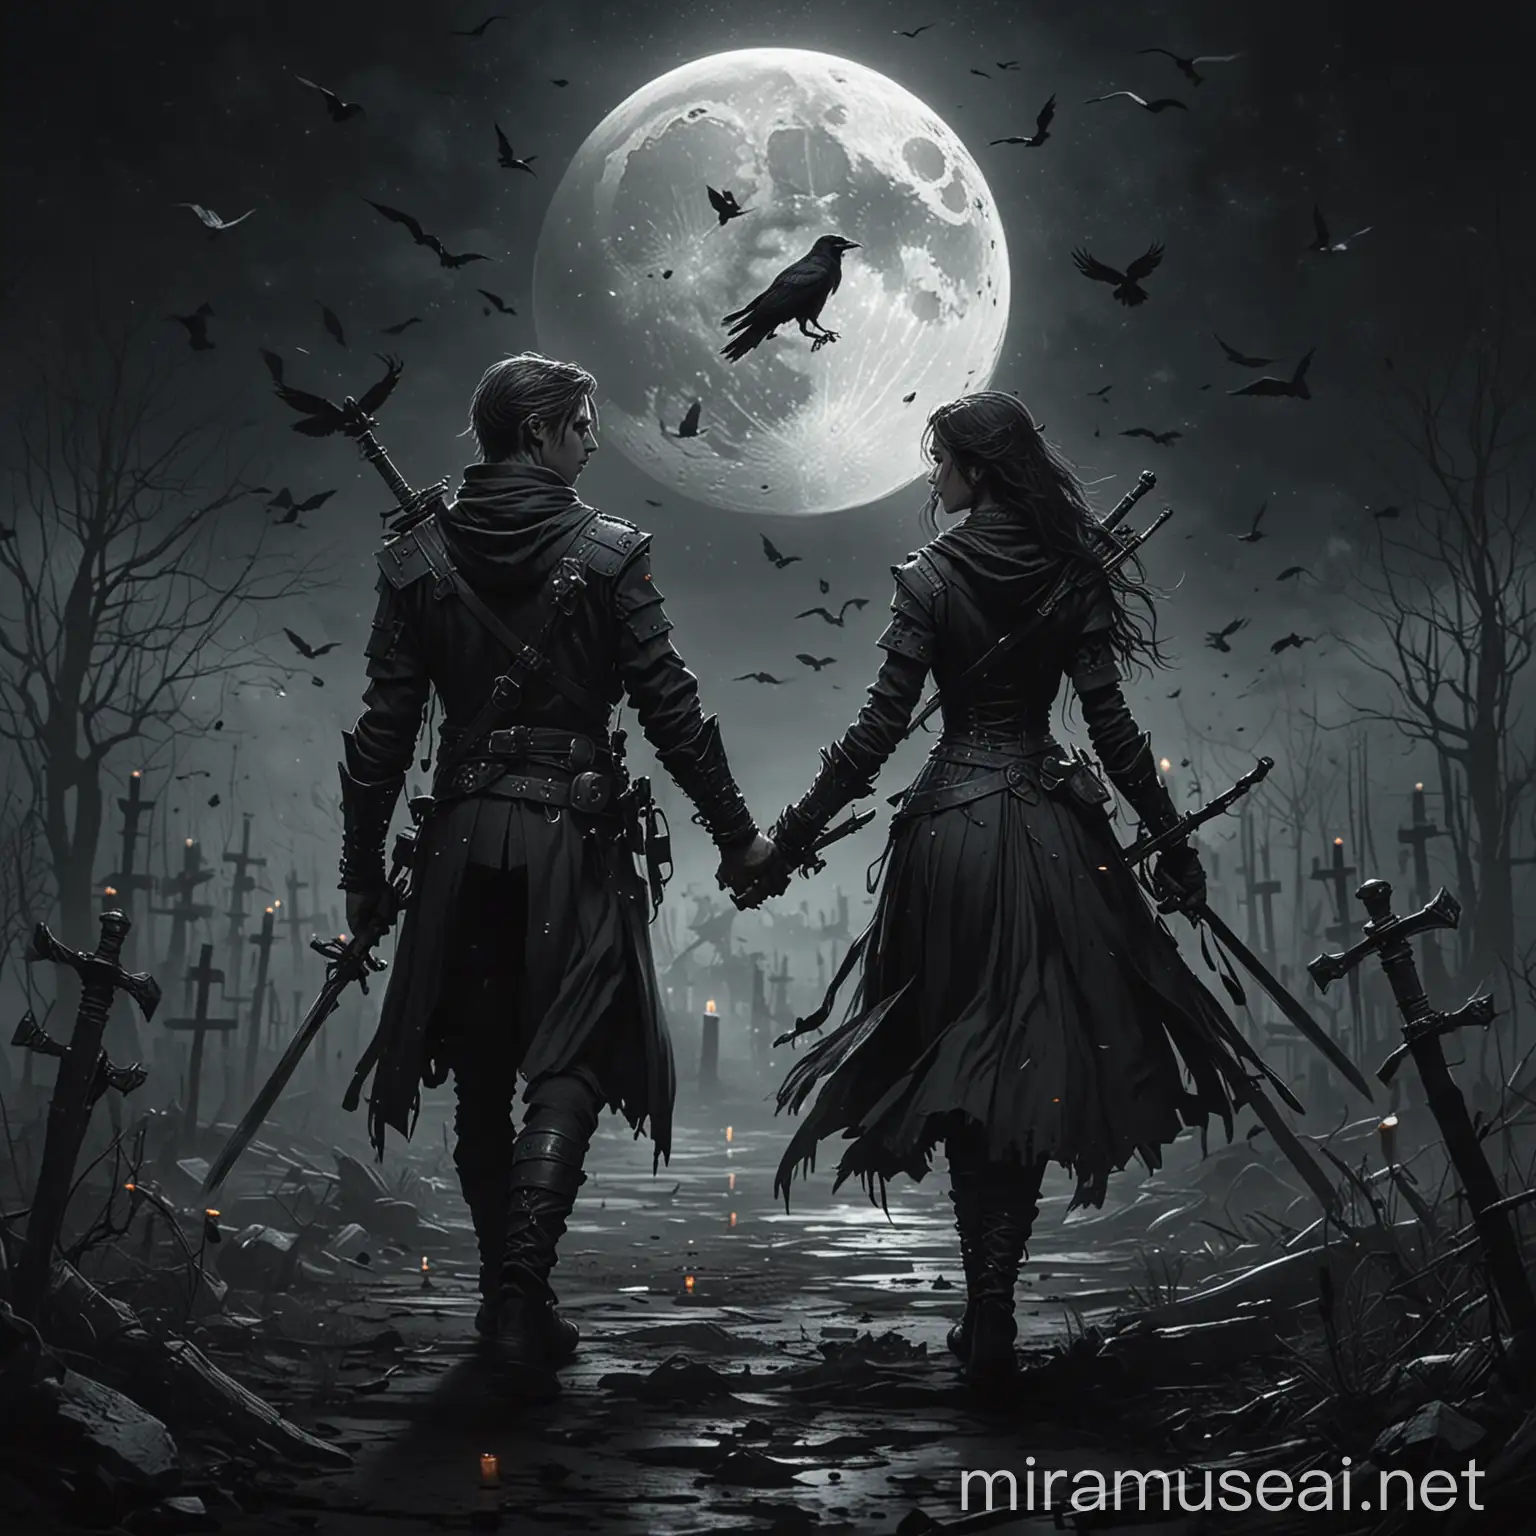 drawing style, lovely couple, holding hands, carrying weapons. dark aesthetic scenery with clear moon some Clocks, lots of Crows, few candles, few falling swords, weapons.